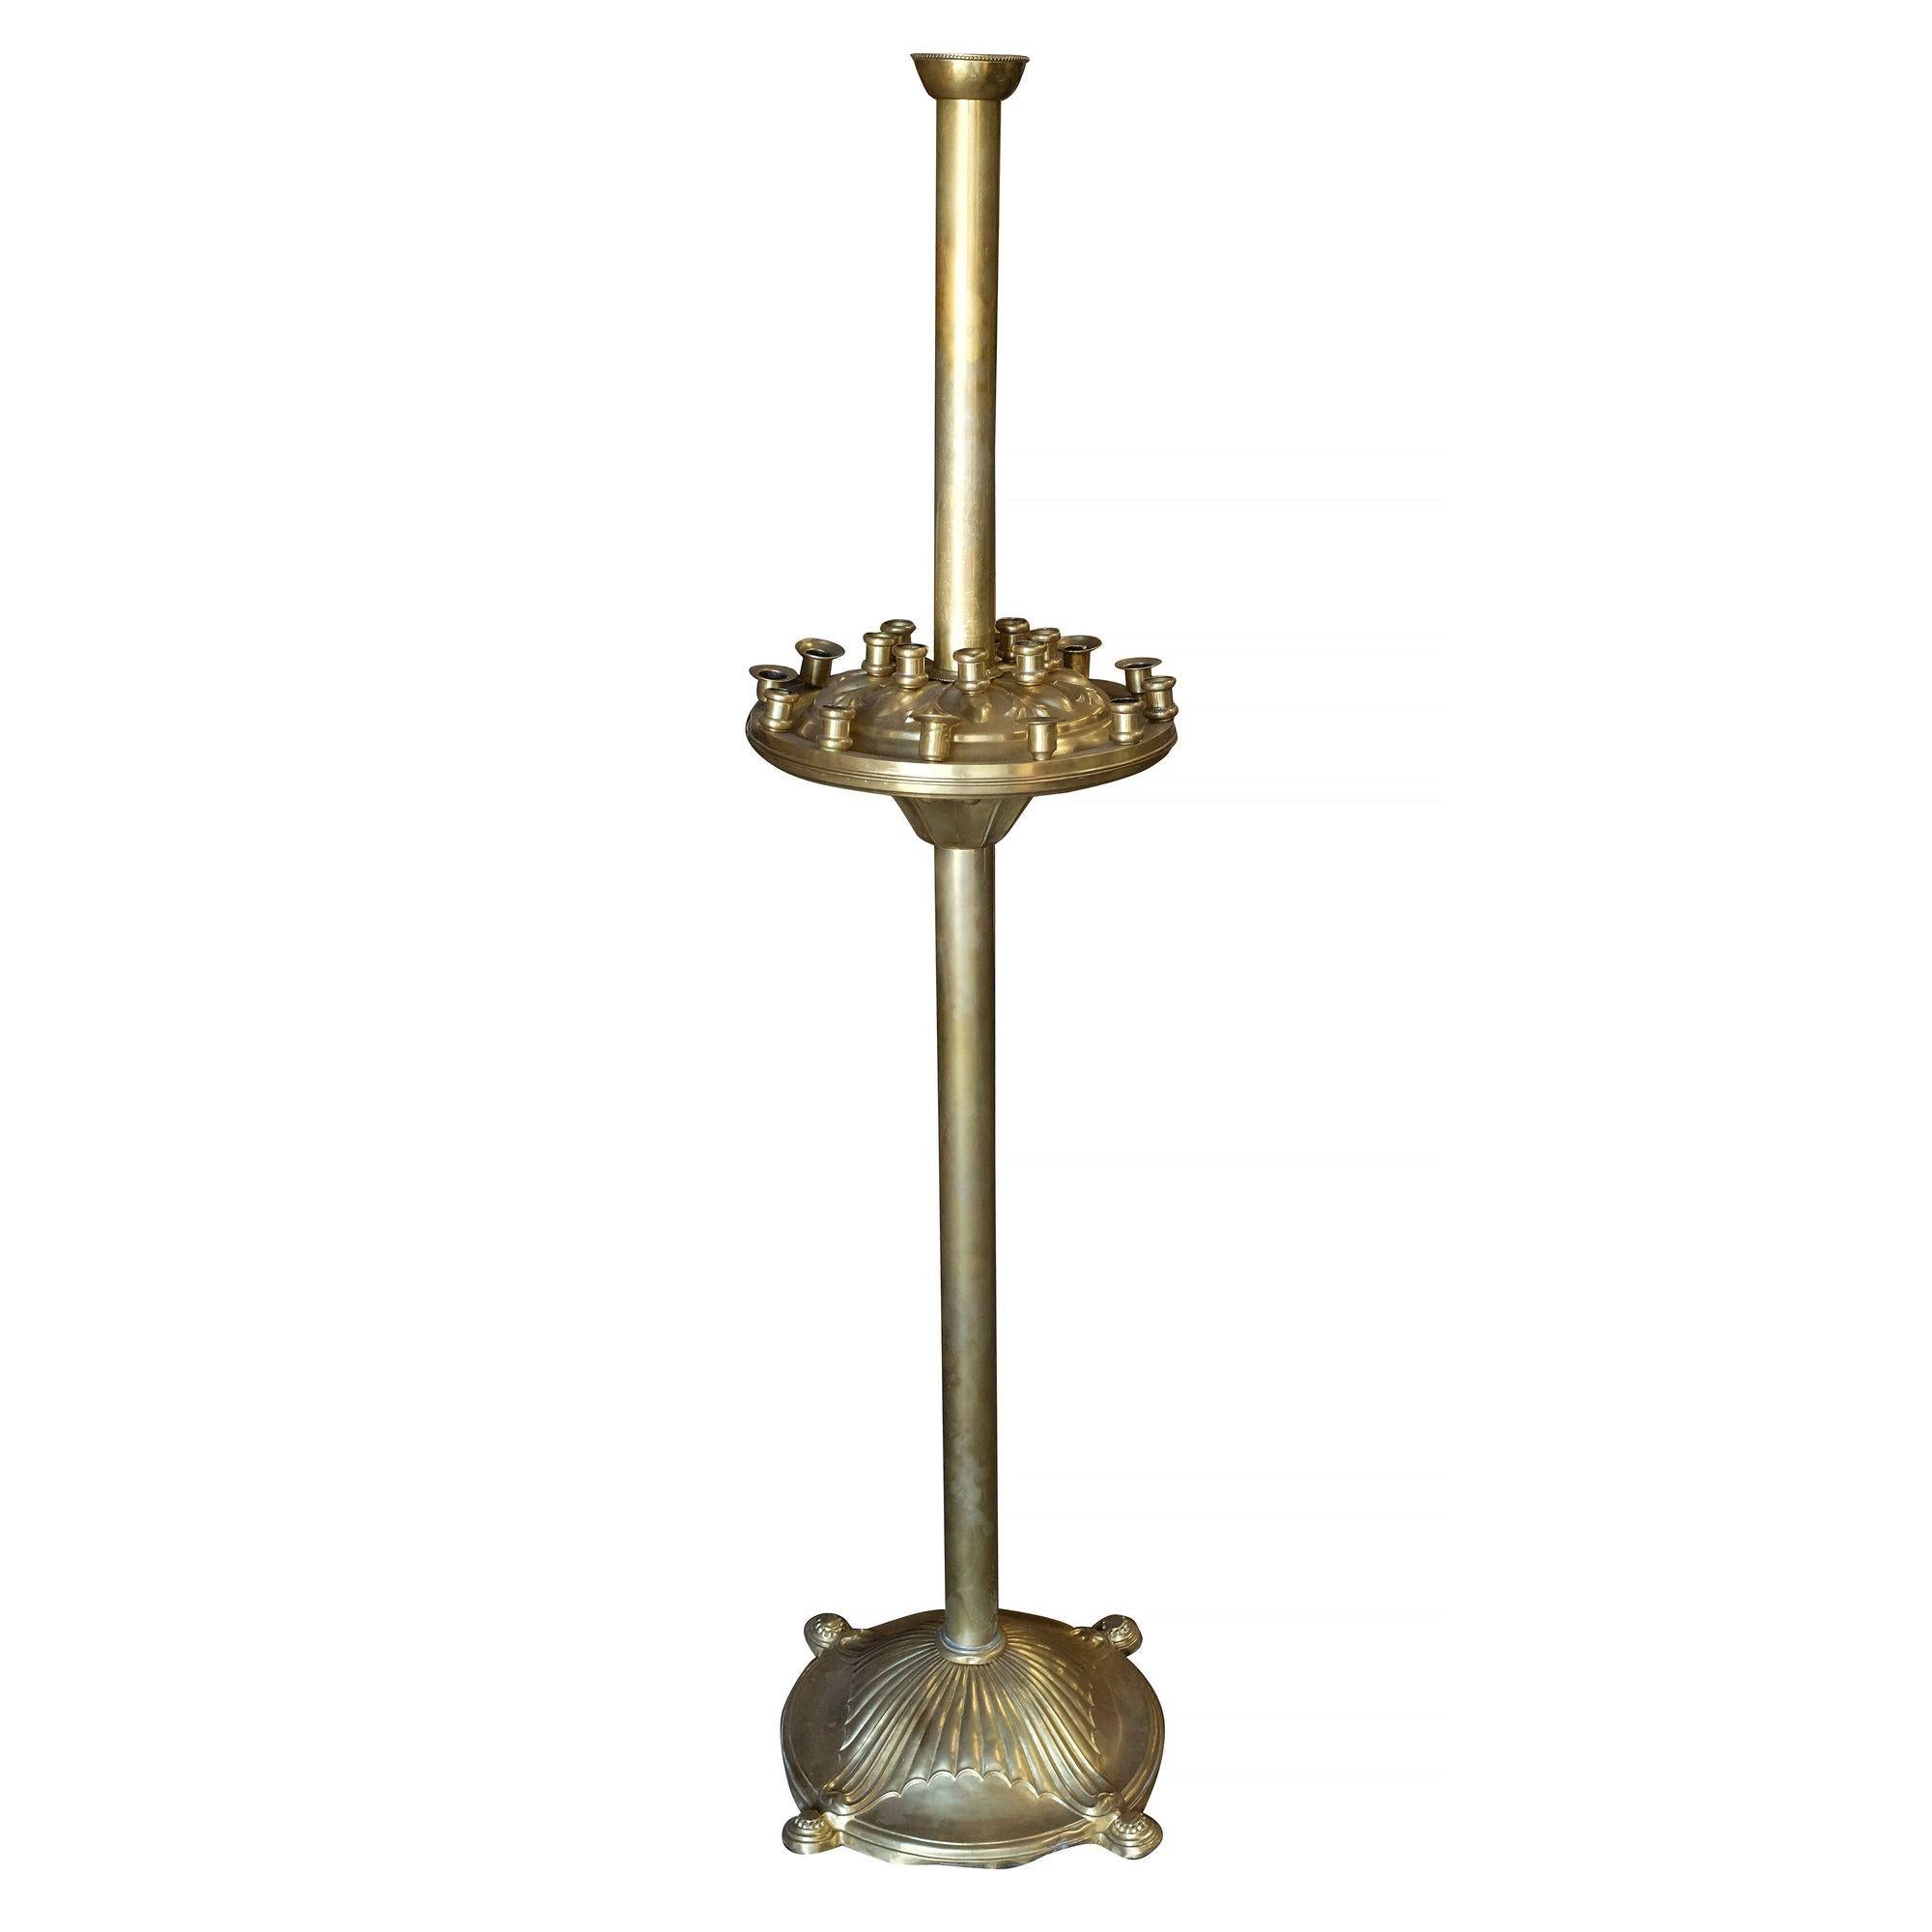 24 candle ceremonial brass floor candelabra usually found in Orthodox Catholic churches,

circa 1920.

   